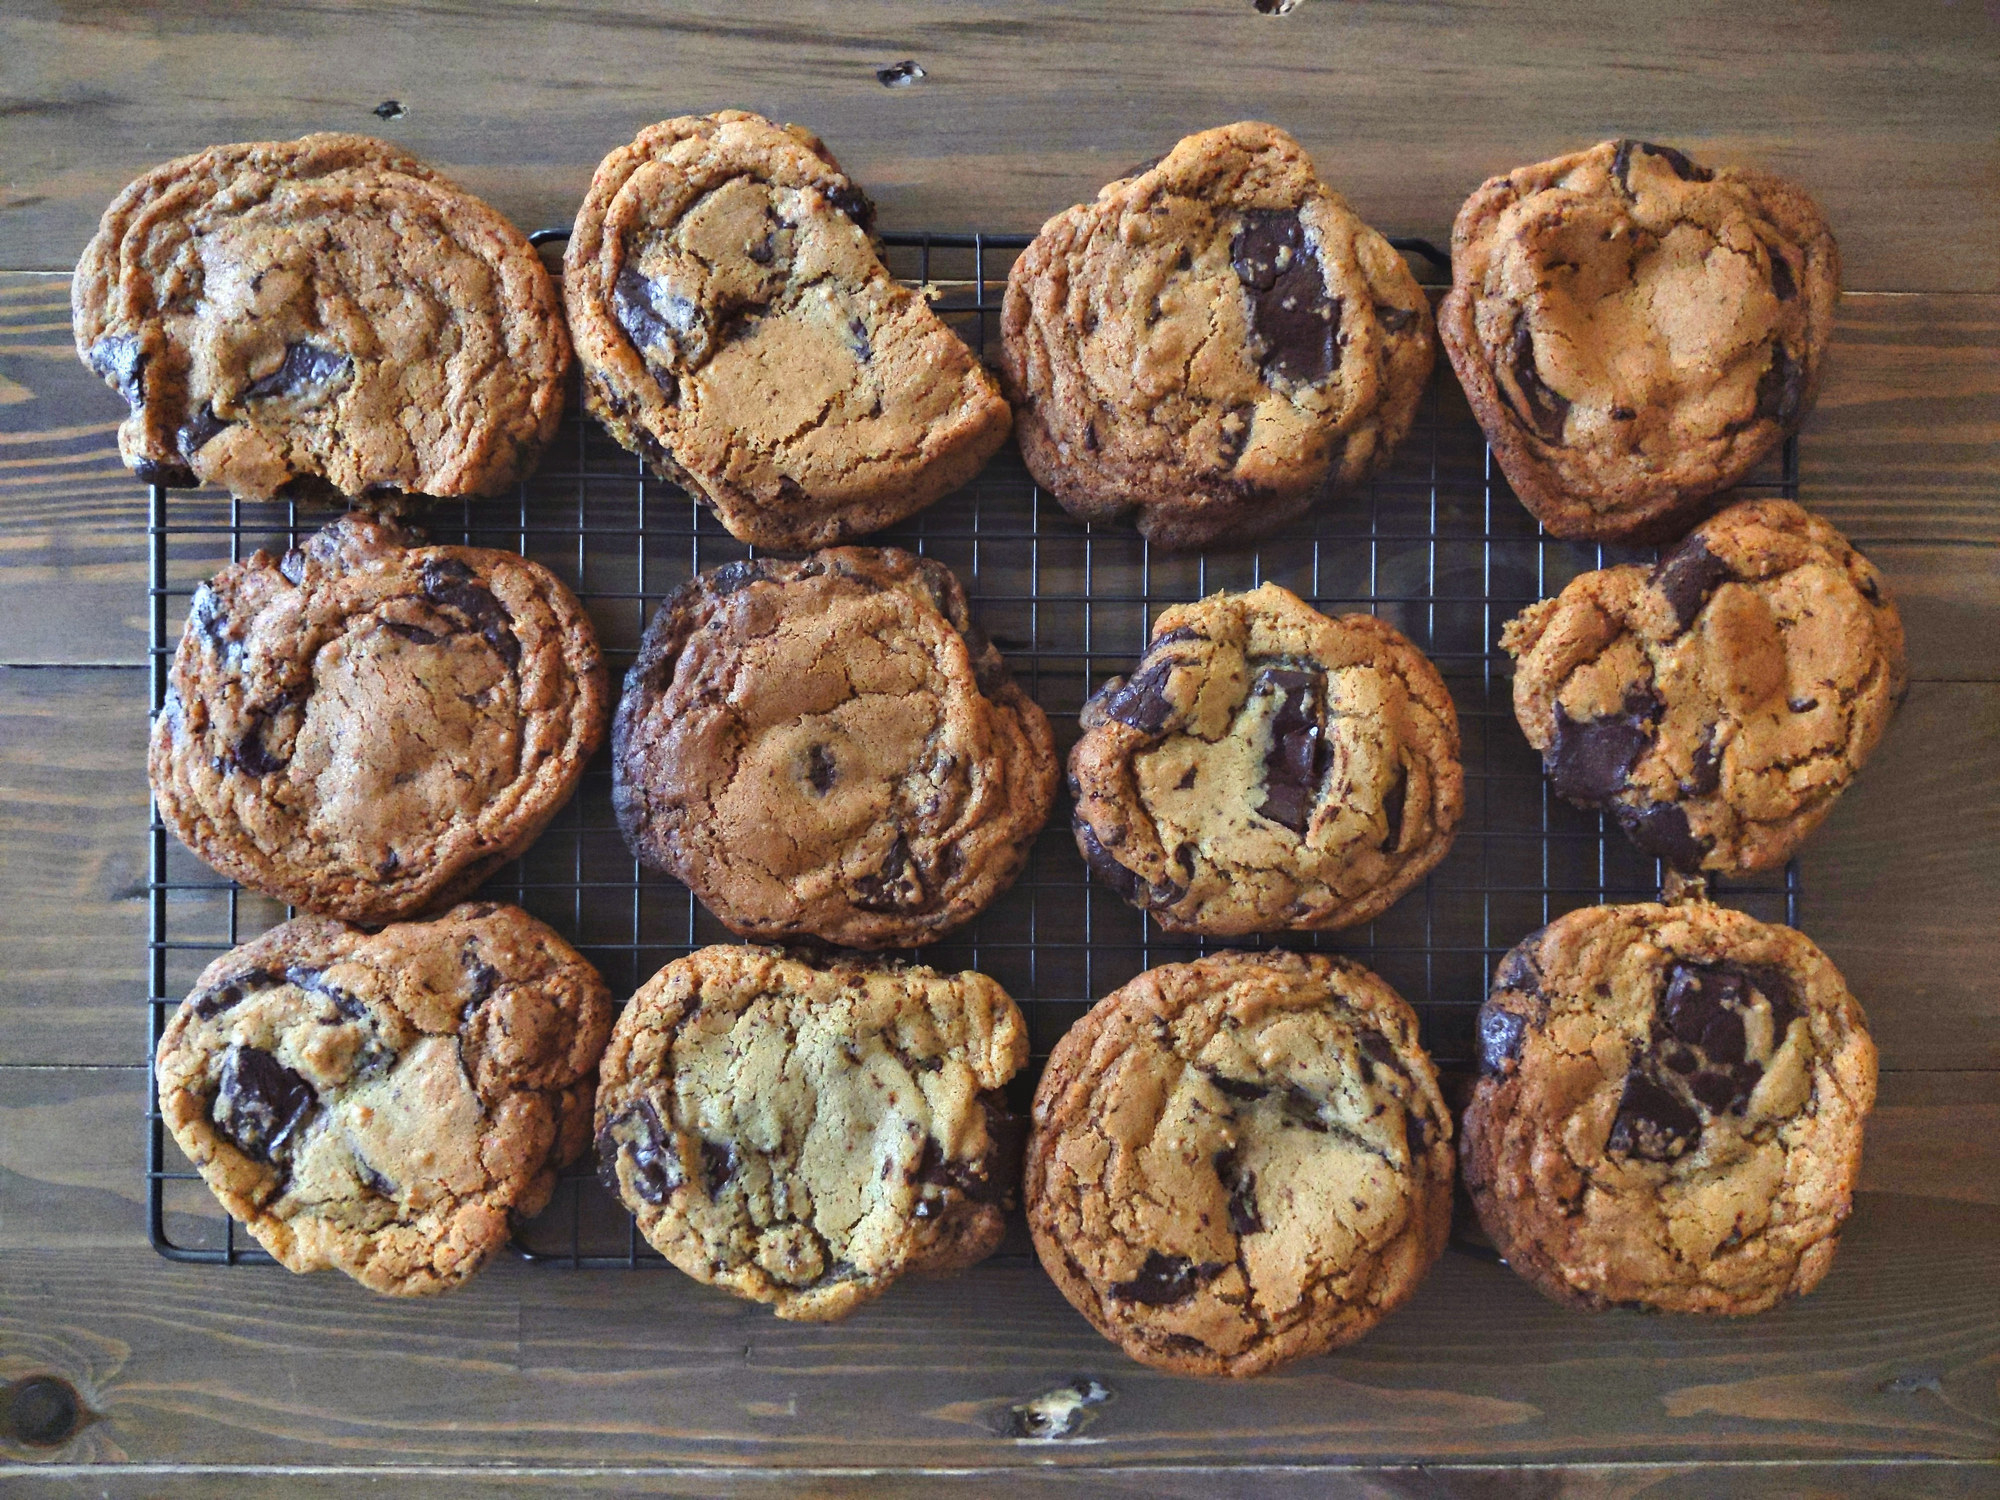 Freshly baked chocolate chip cookies on a rack